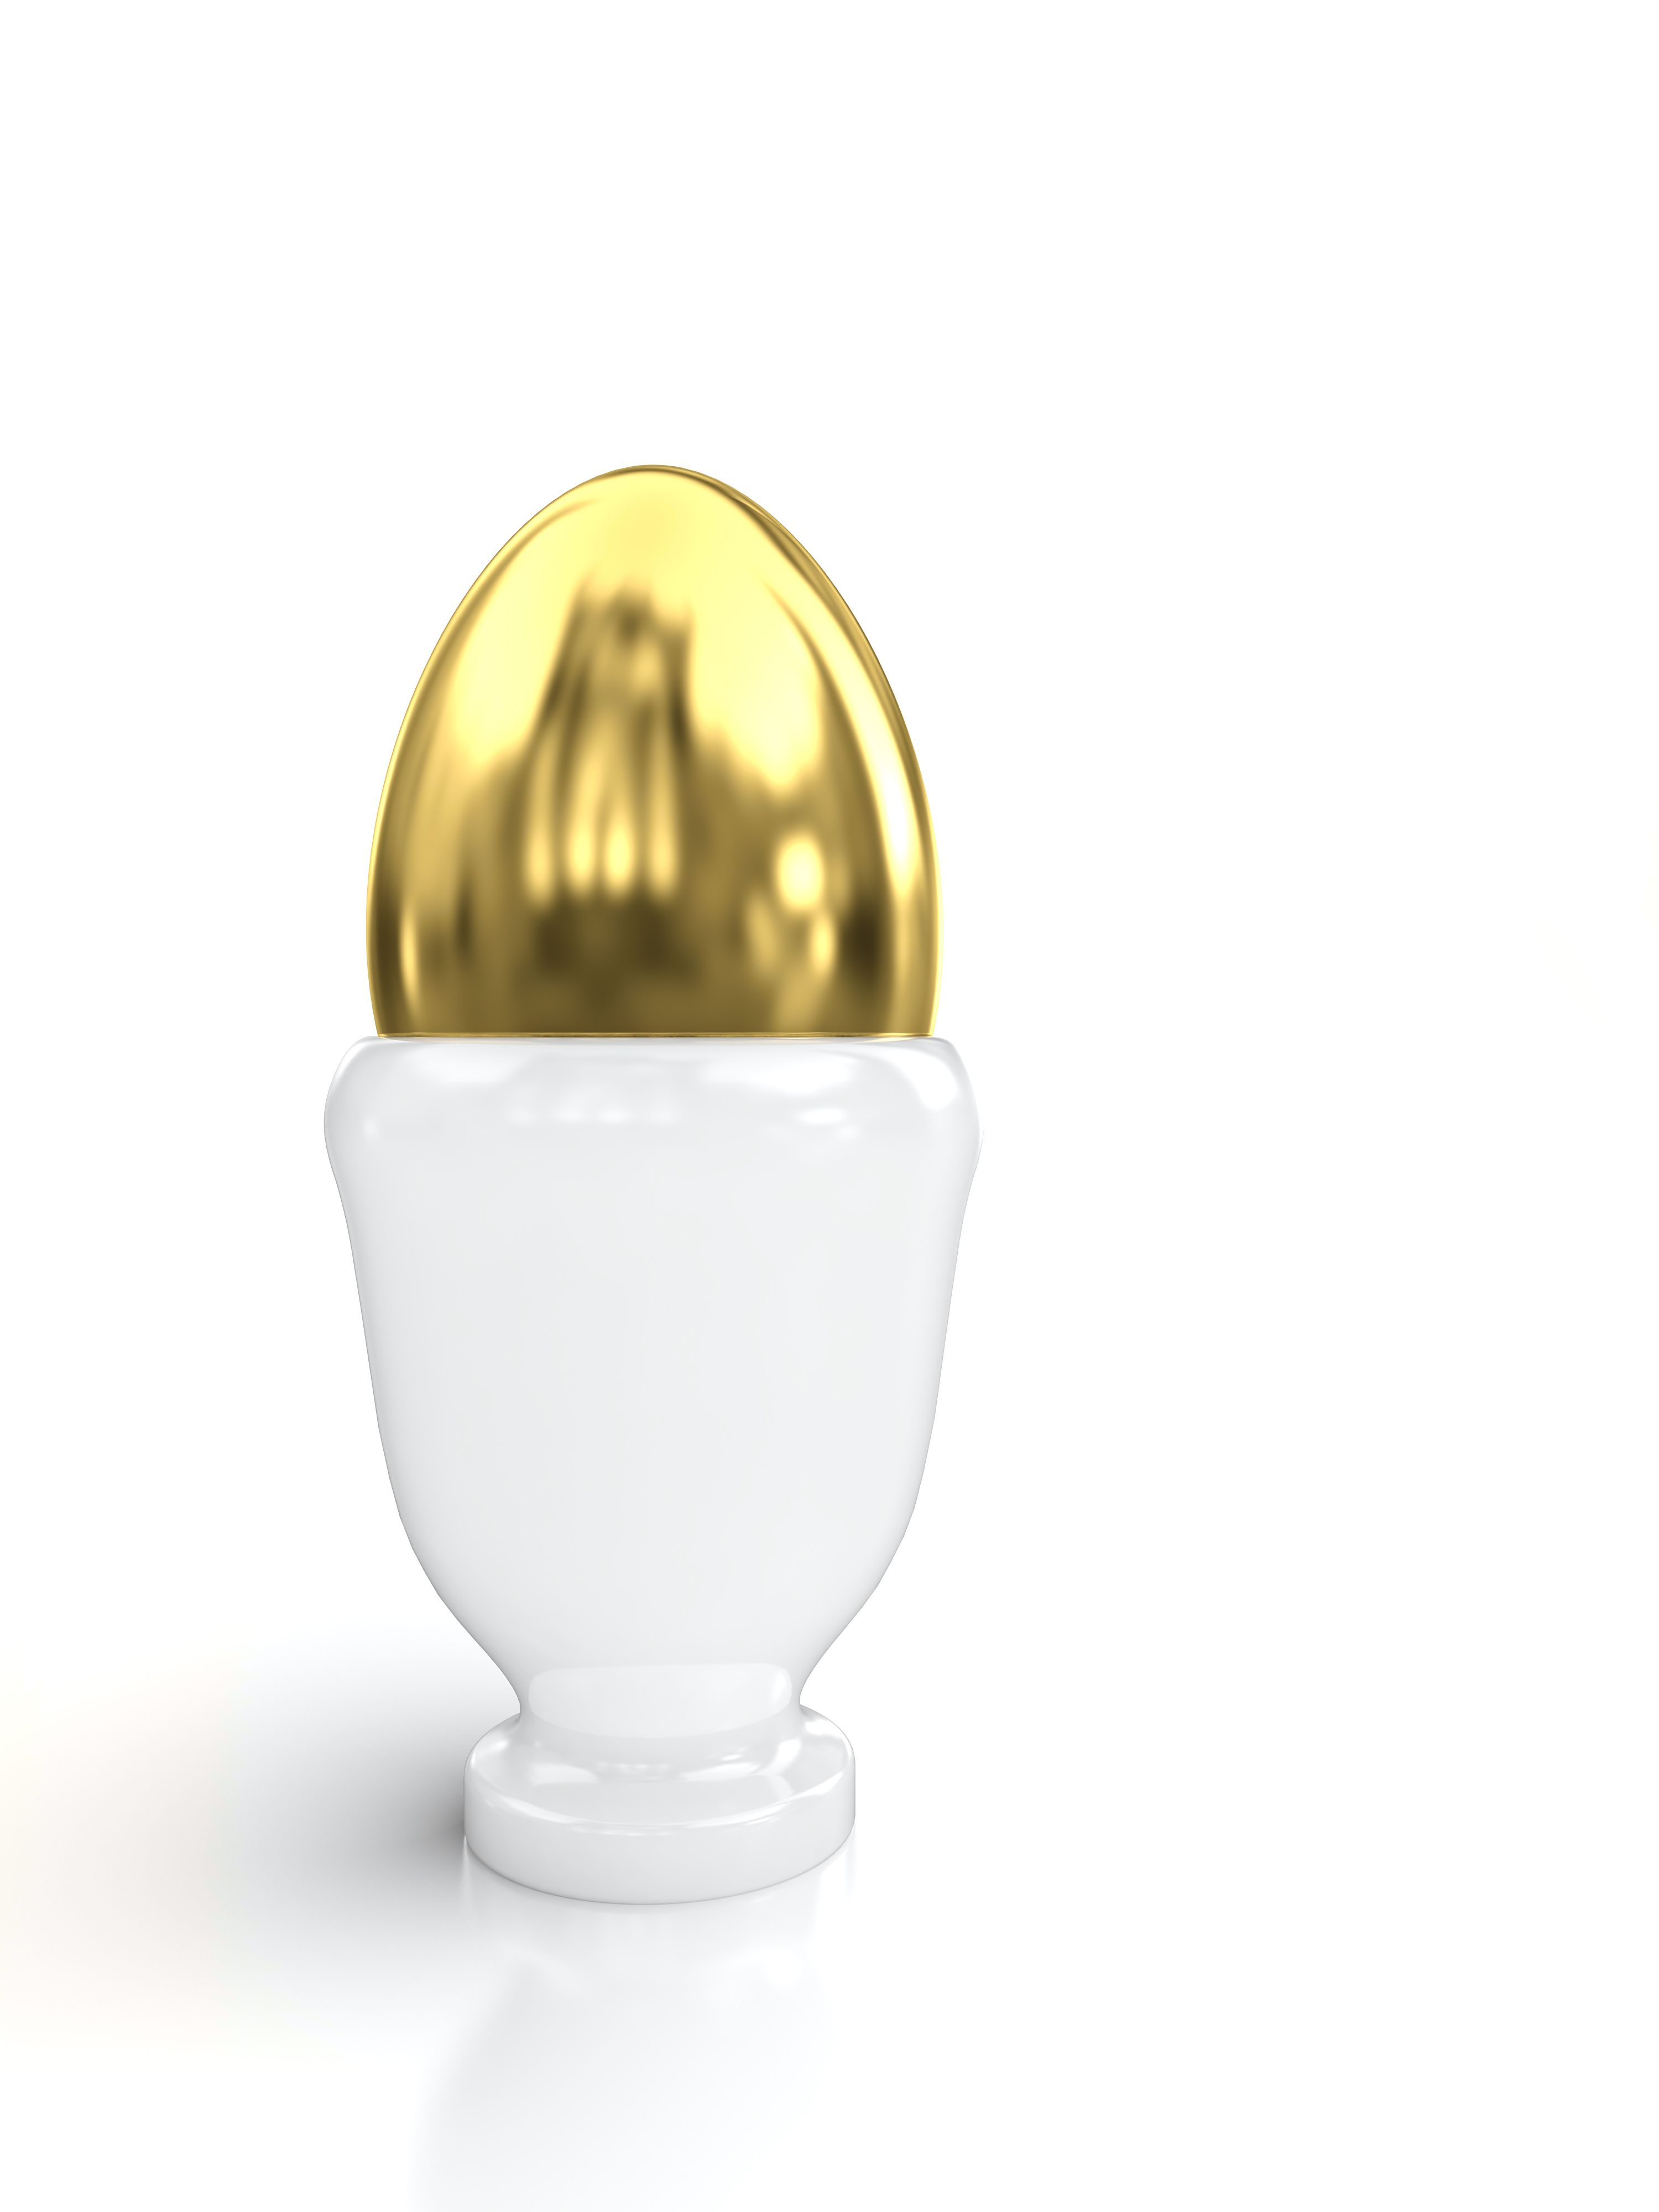 Golden egg in egg cup isolated on white background.